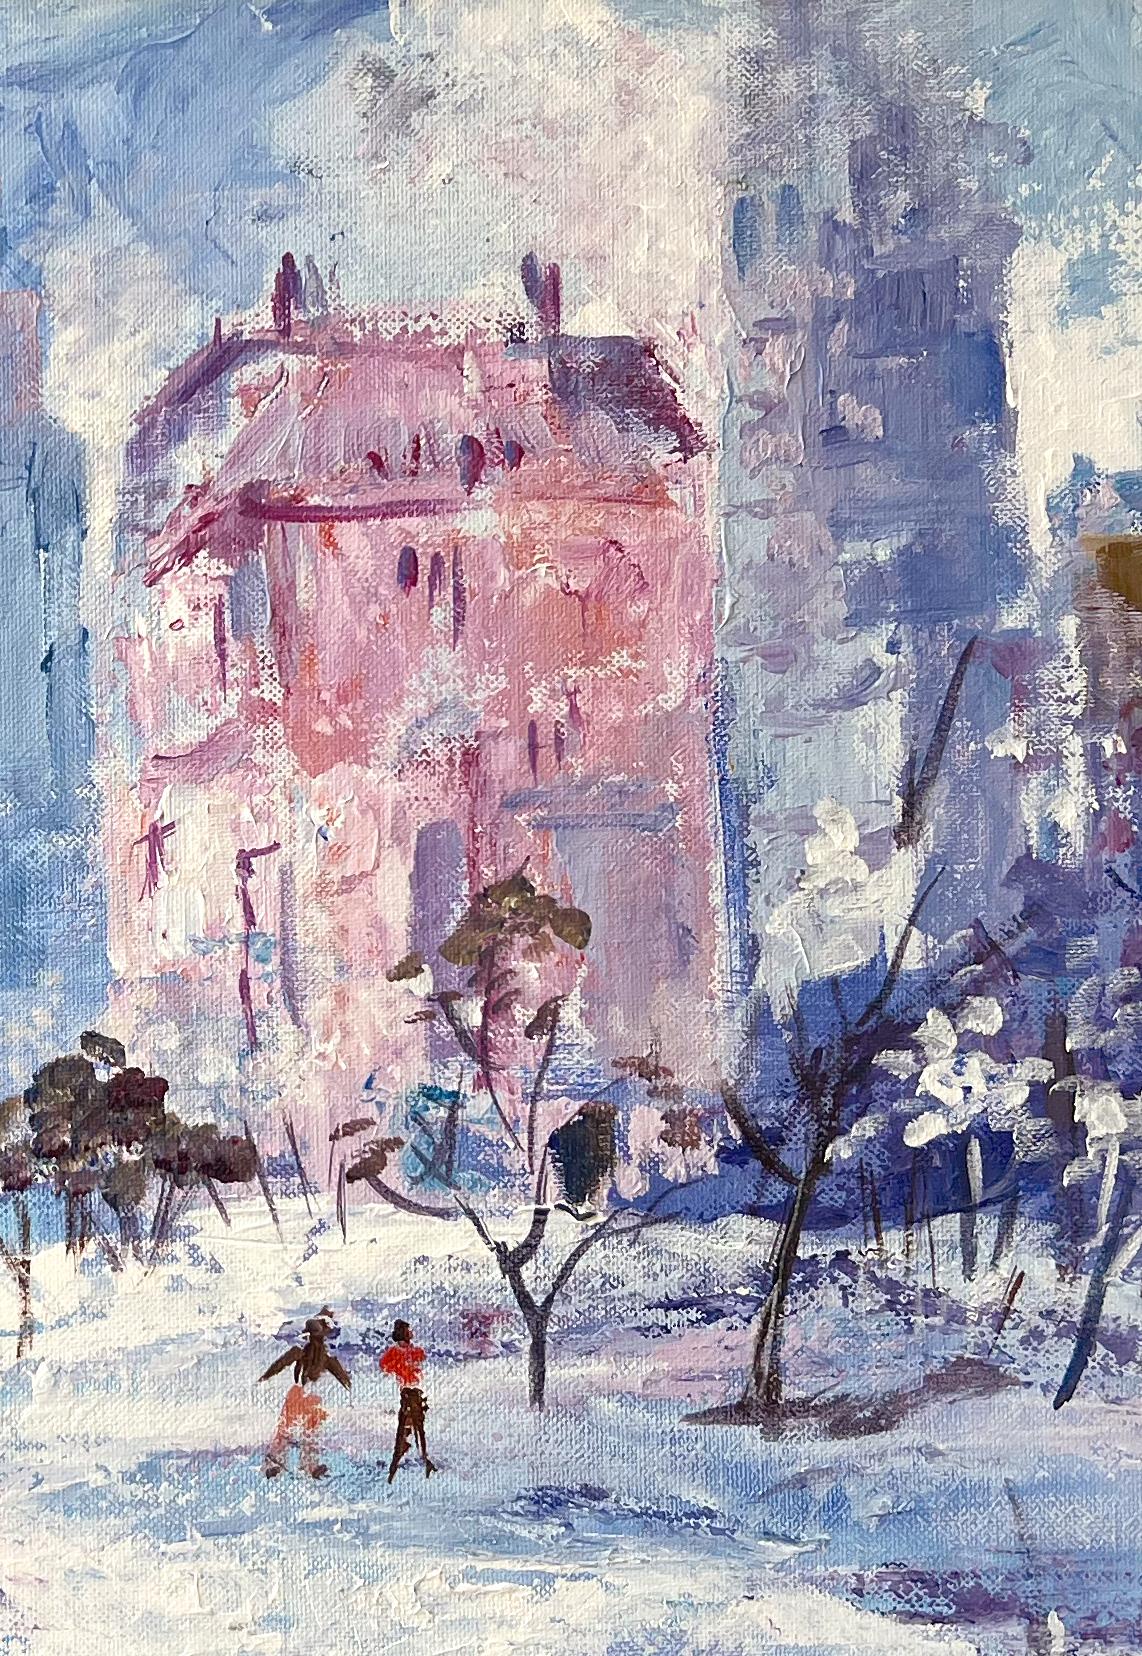 Central Park, New York City, Winter, Snow, Skating, Mid-Century, Oil - Impressionist Painting by Edna V. Culbreth